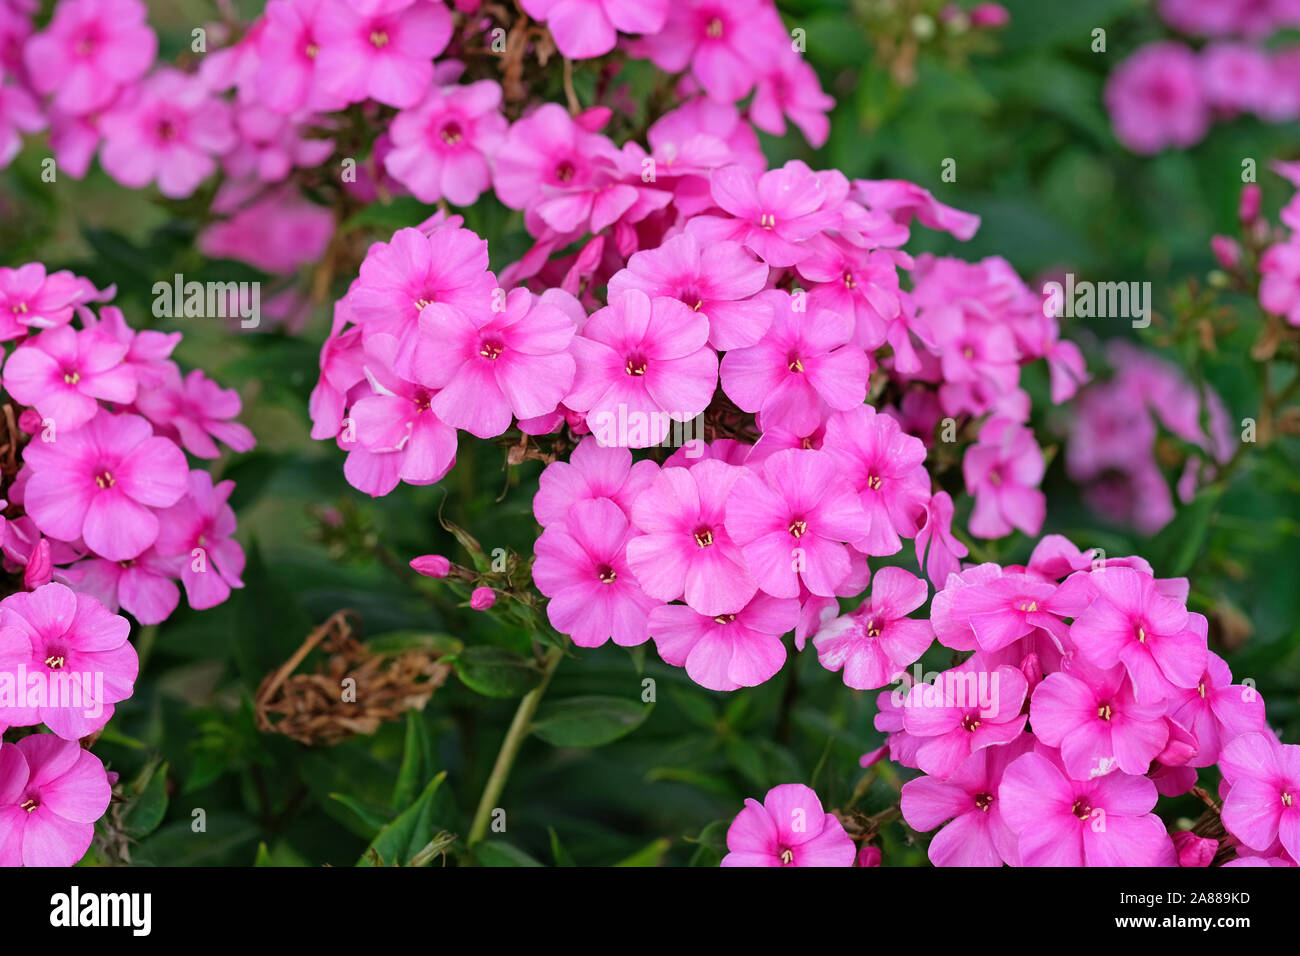 Pink flame flowers of phlox (Phlox paniculata) bush of flowers of Summer phlox, herbaceous perennial in the garden close-up. Pink delicate flowers. Stock Photo